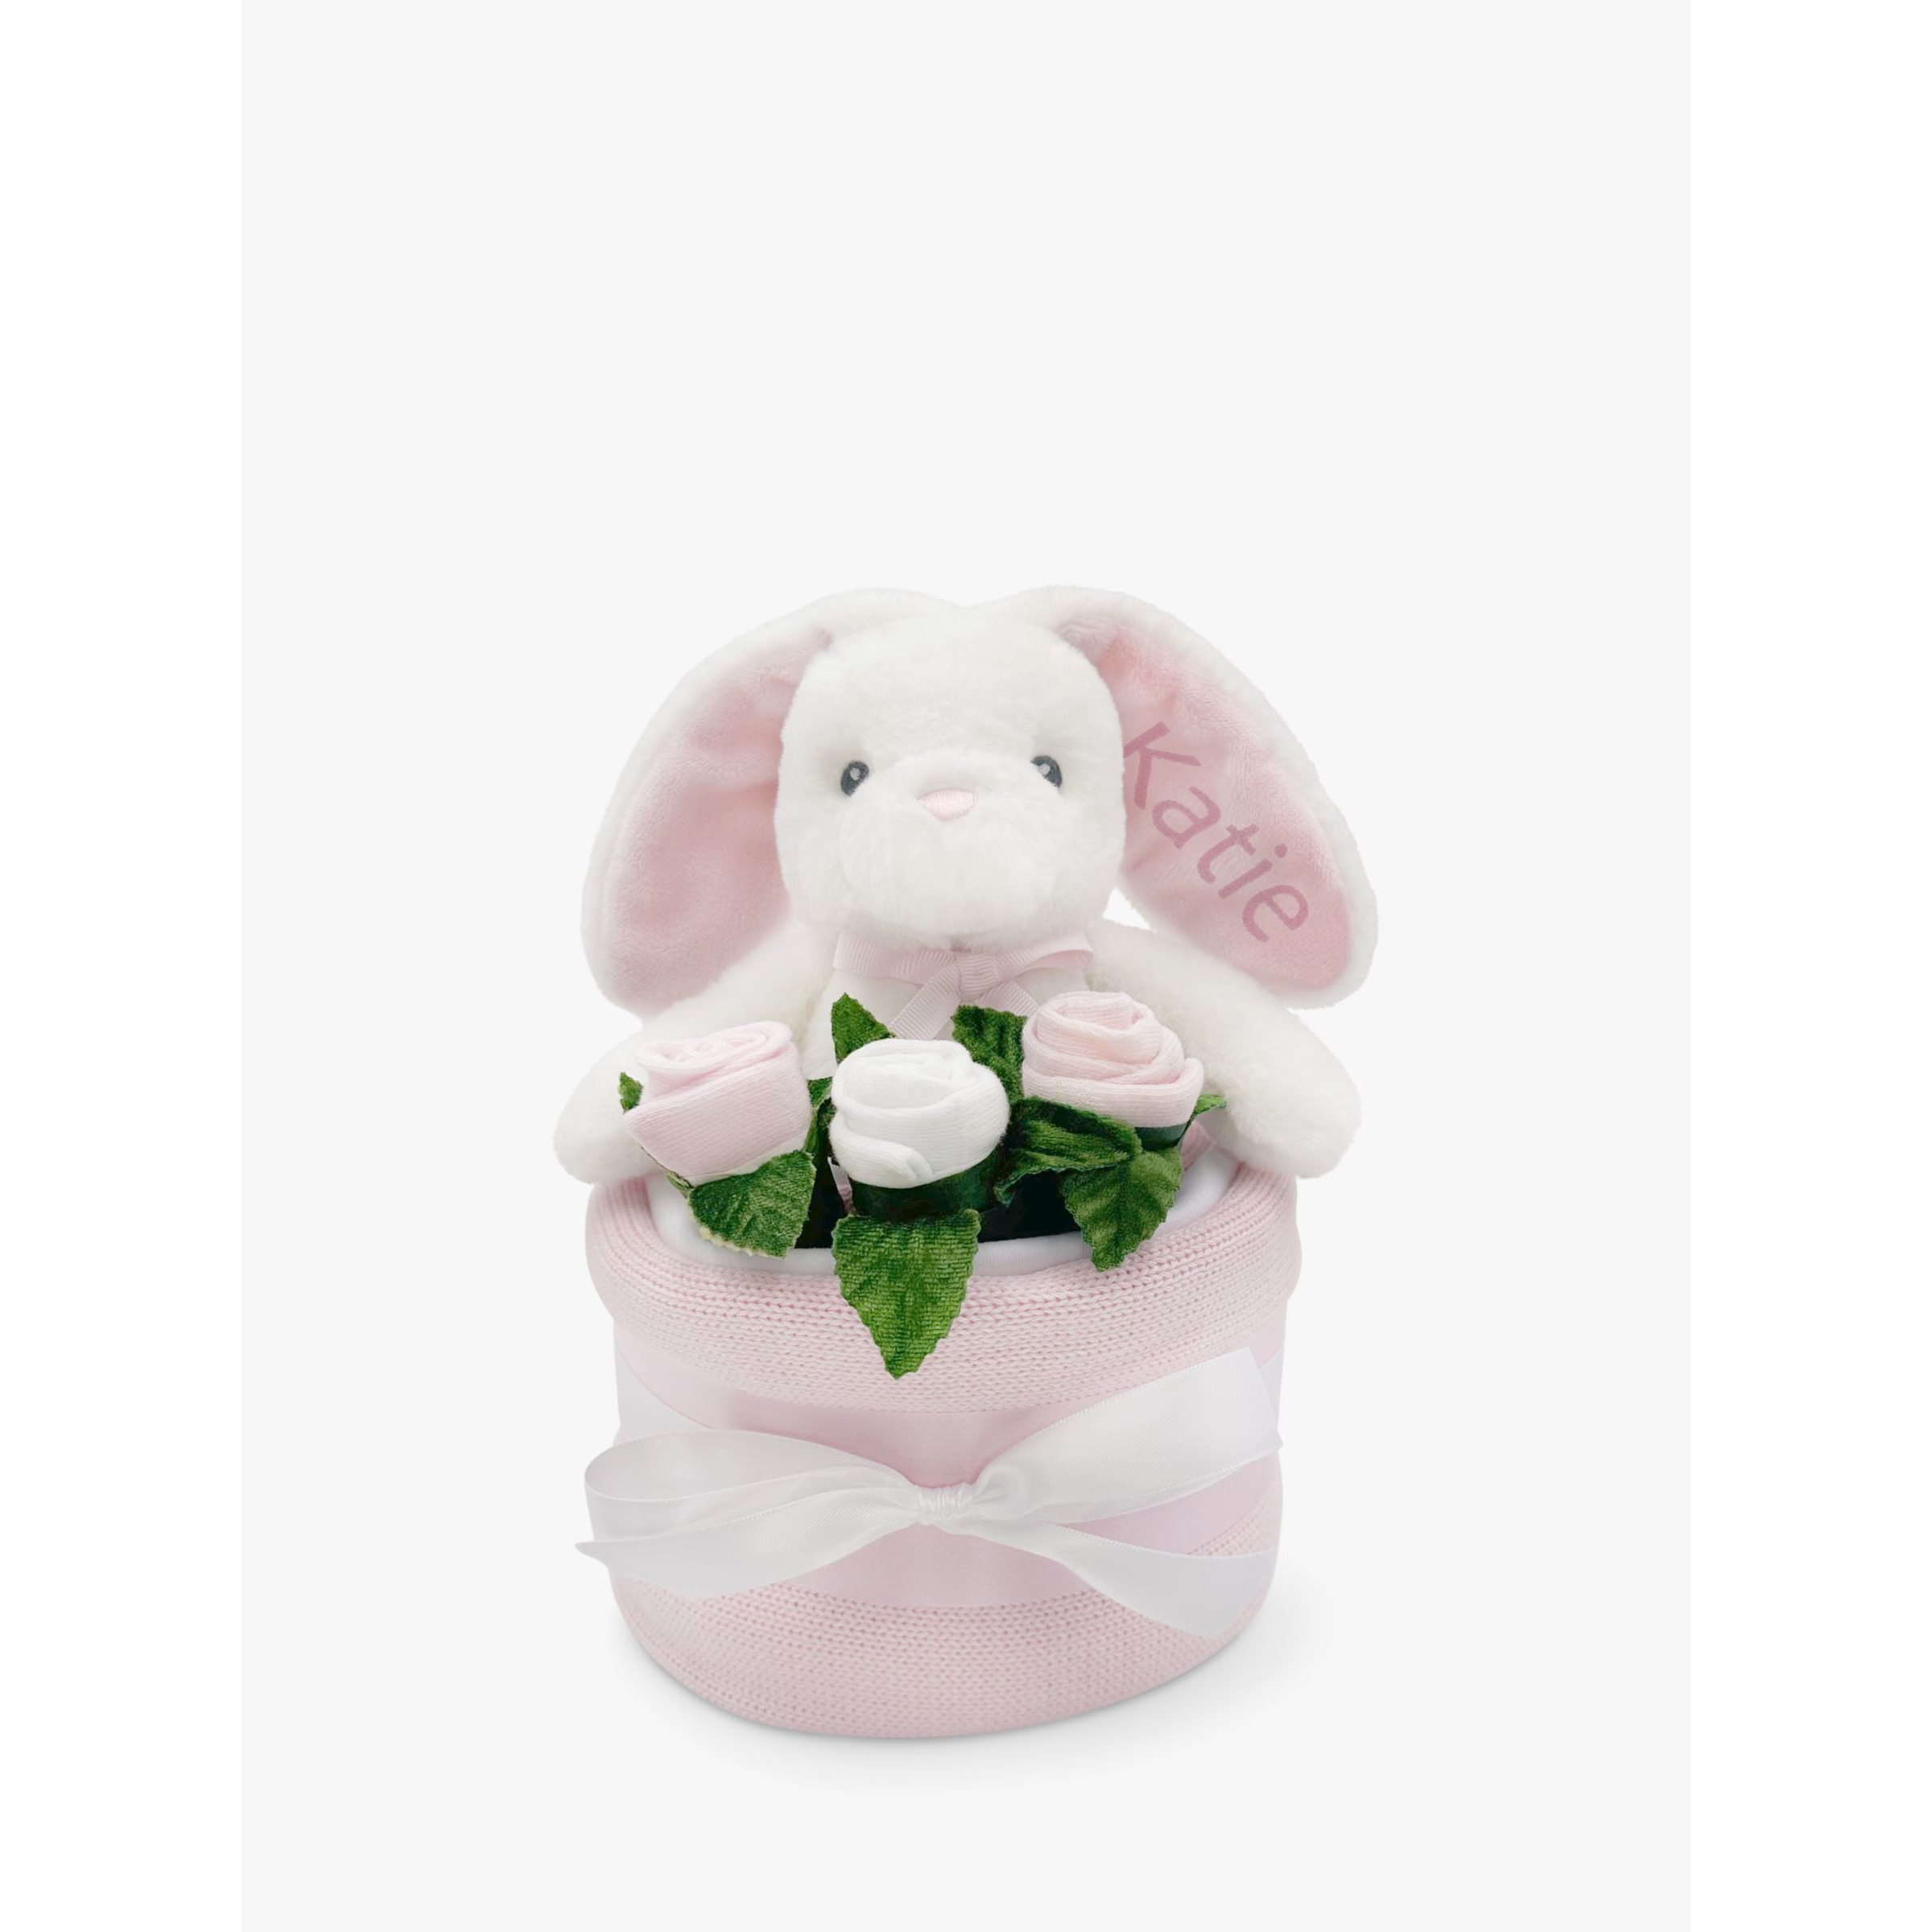 Babyblooms Blanket Cake with Personalised Baby Bunny Soft Toy, Light Pink - image 1